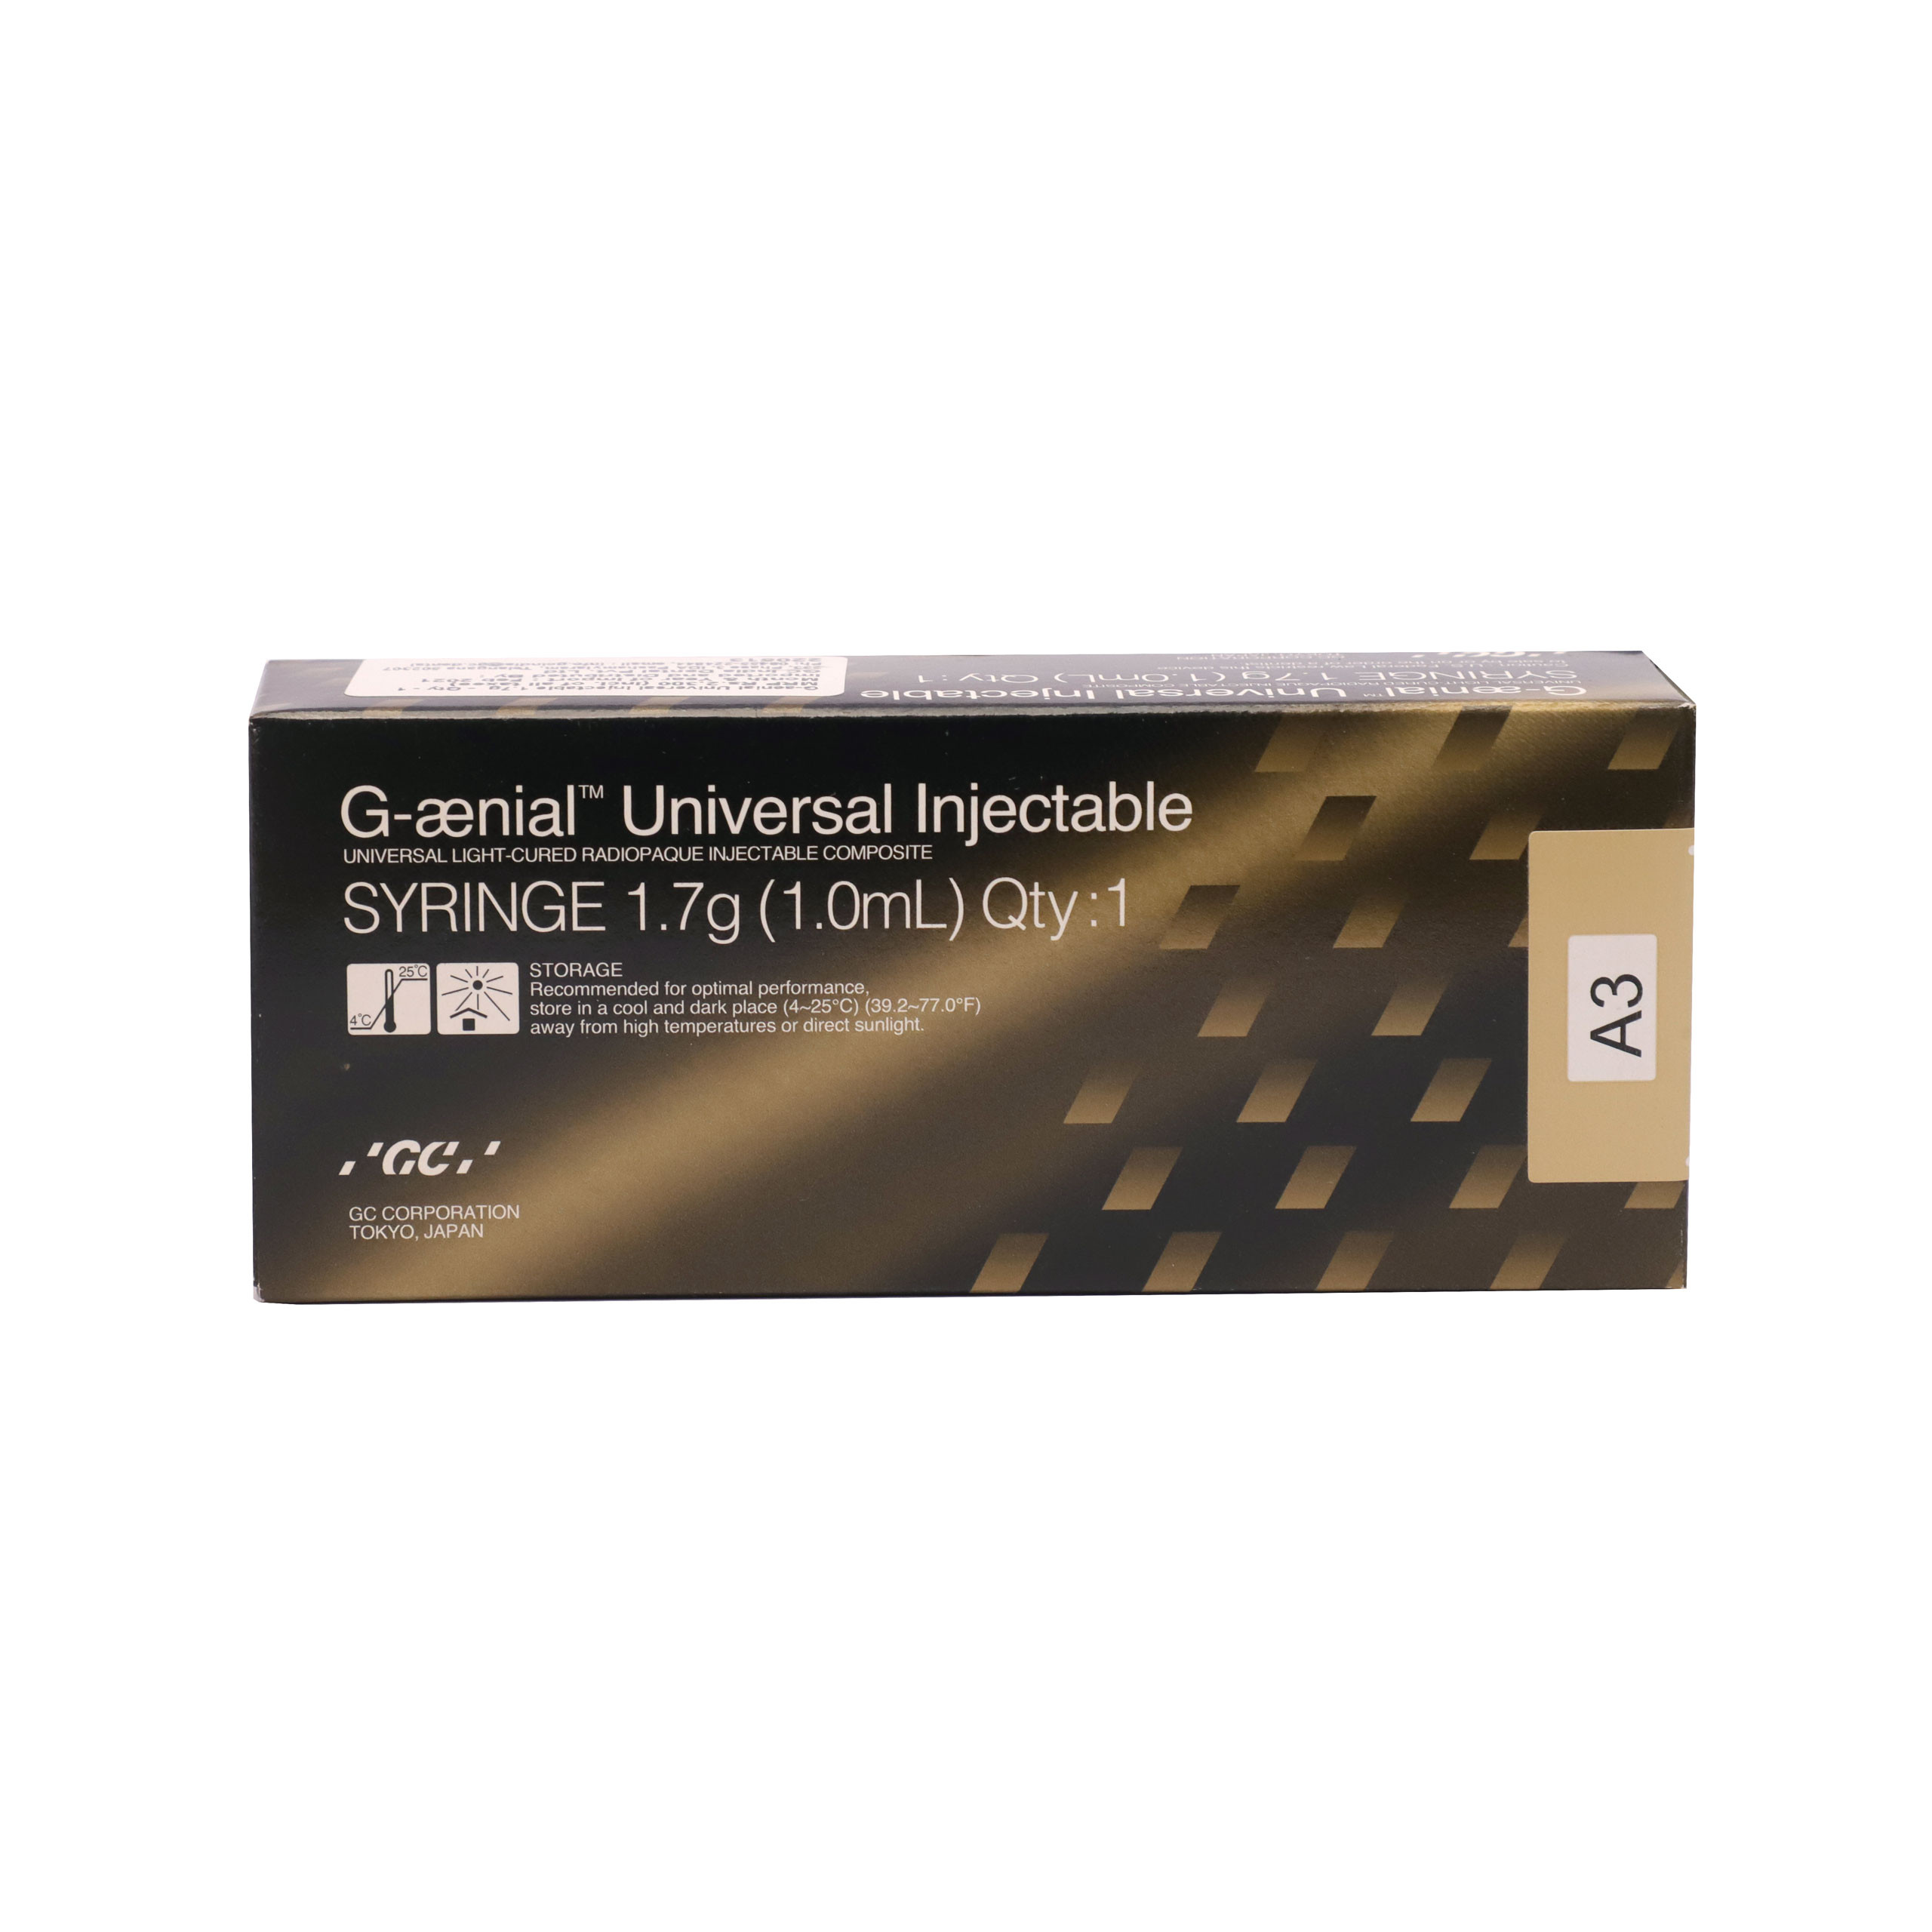 G-aenial Universal Injectable A-3